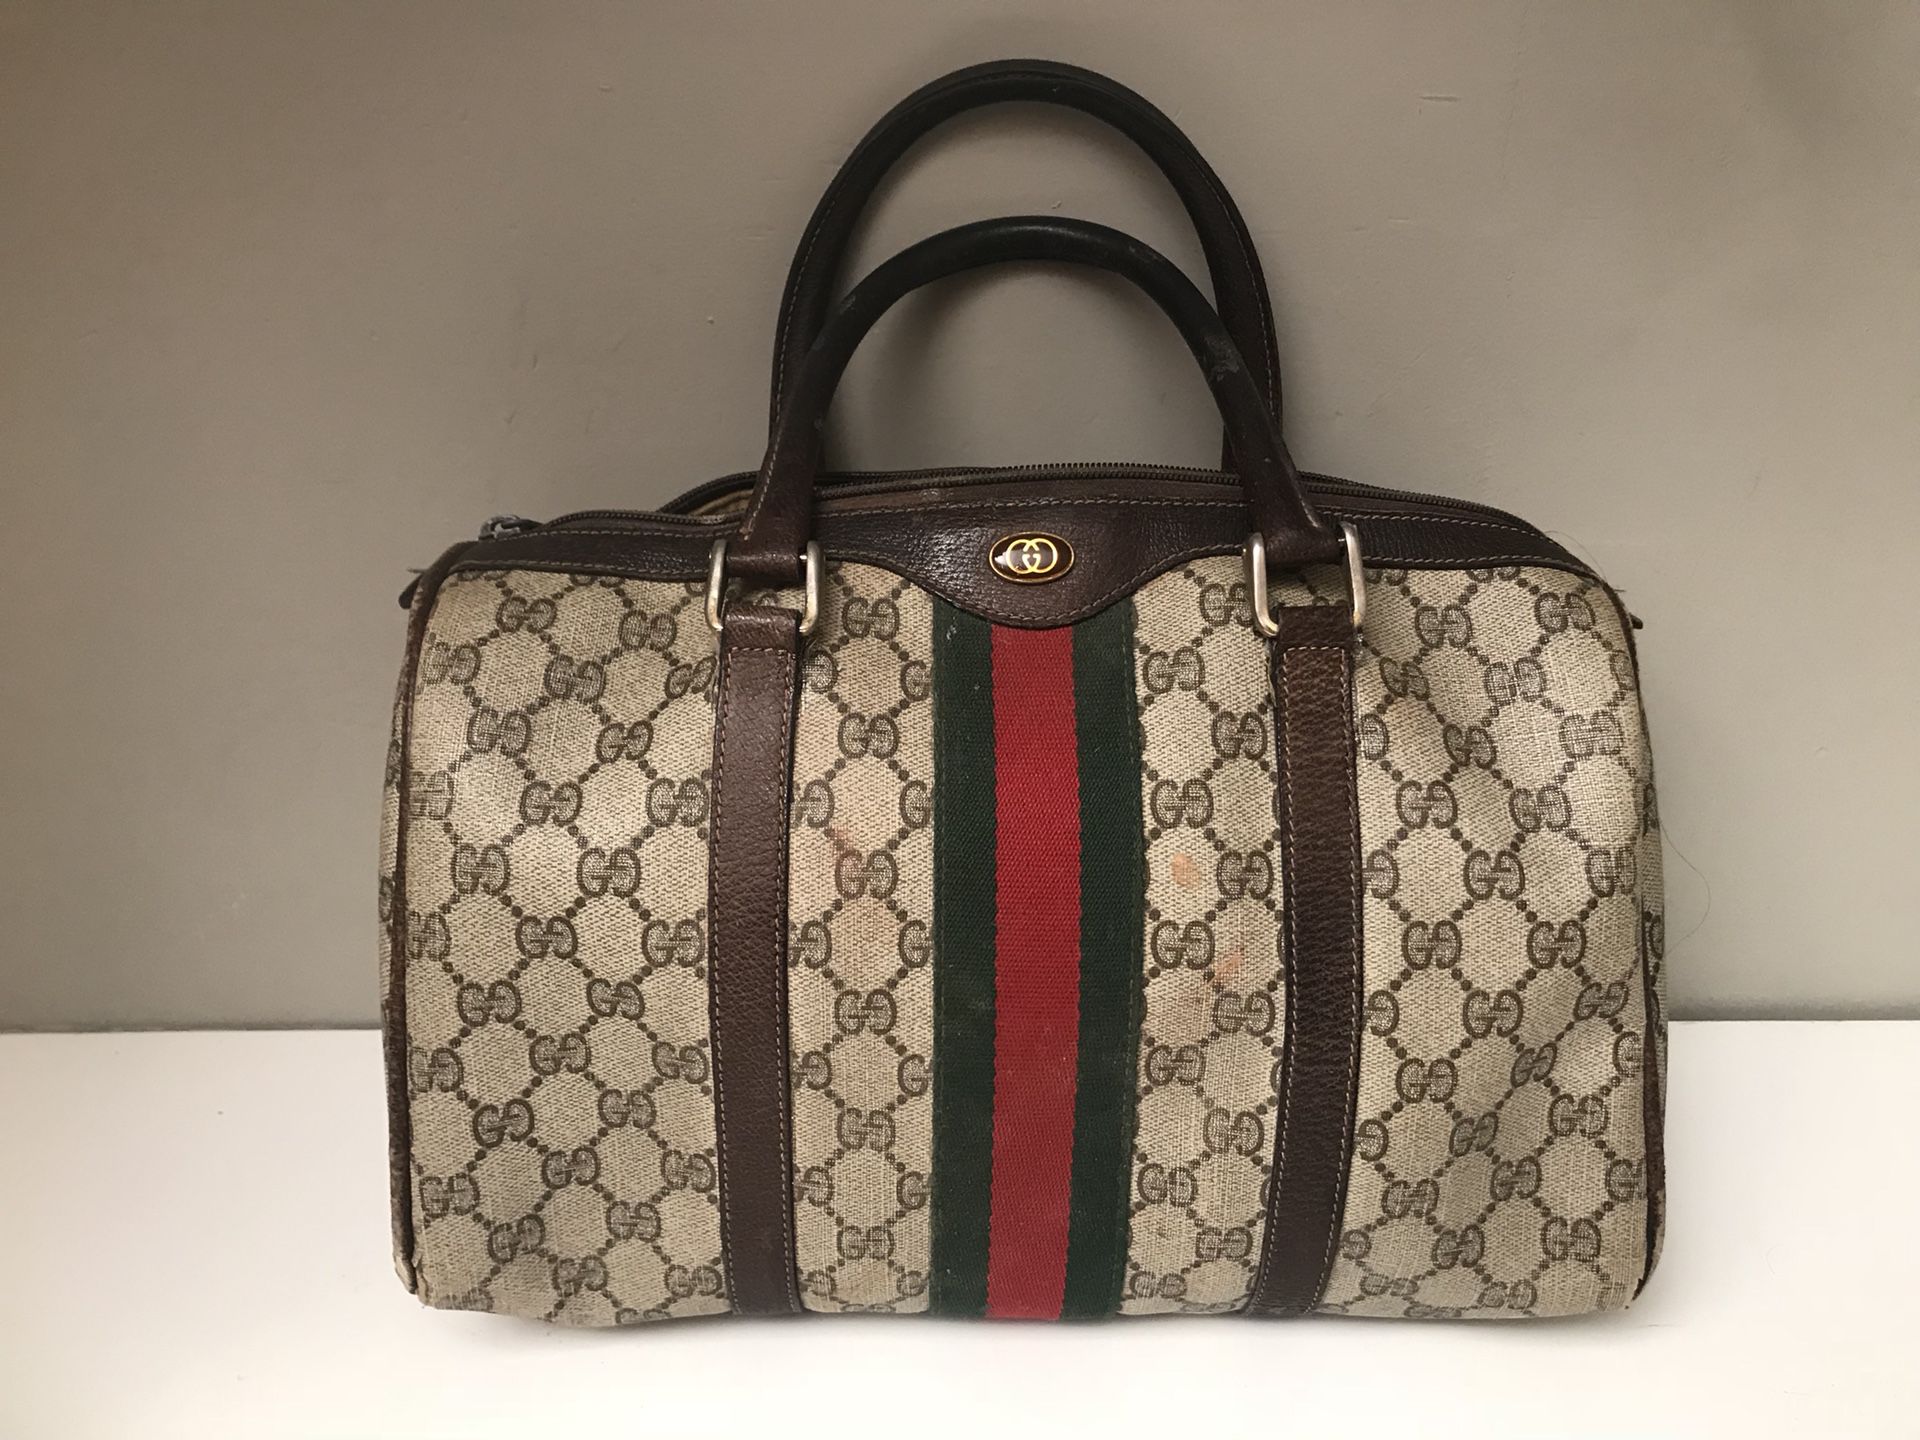 AUTHENTIC GUCCI DOCTORS SATCHEL IN NEED OF TLC